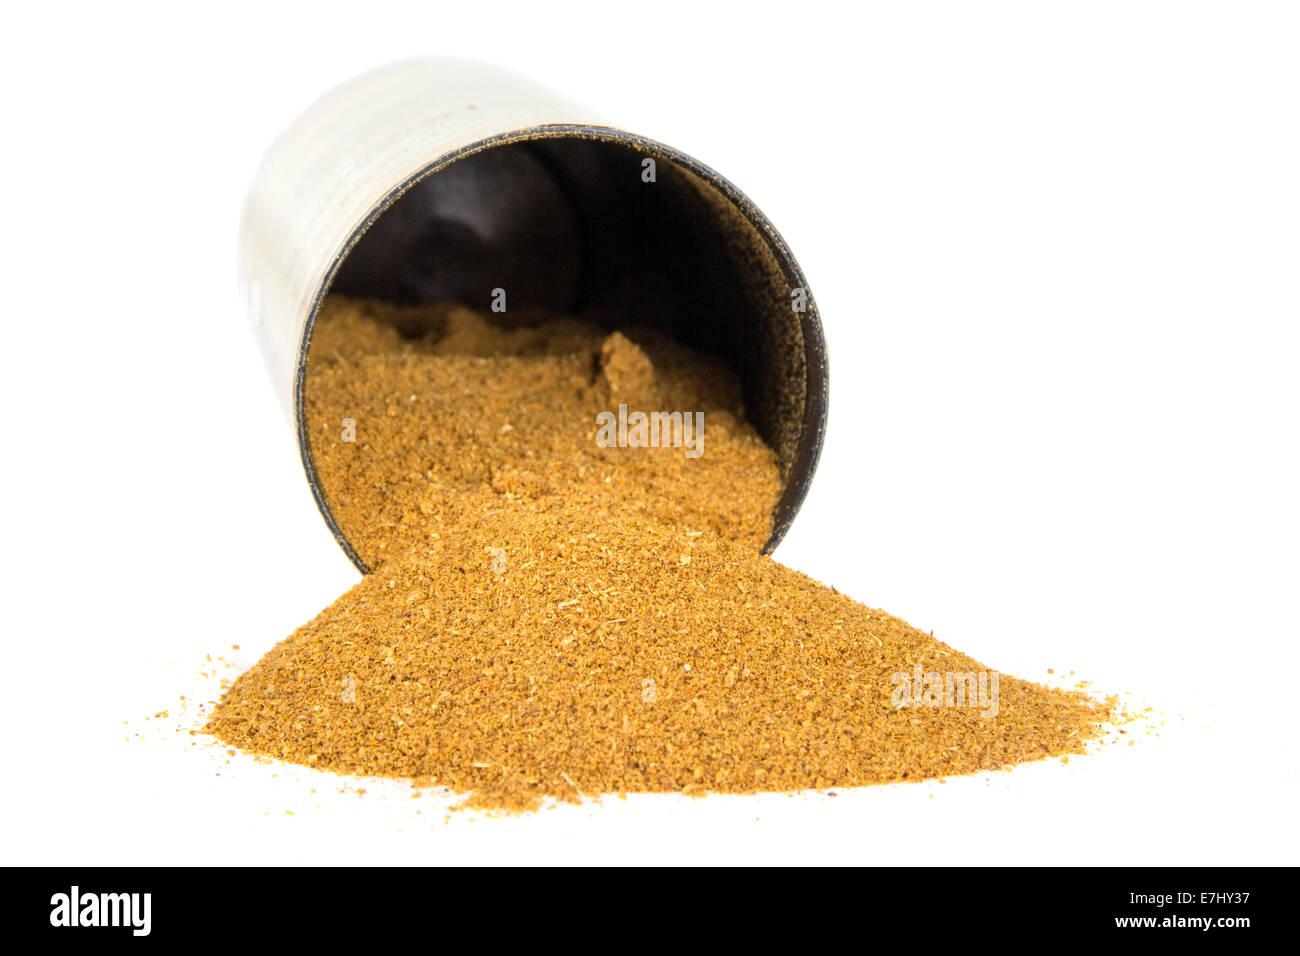 Curry powder spilling from a spice container isolated over white background Stock Photo